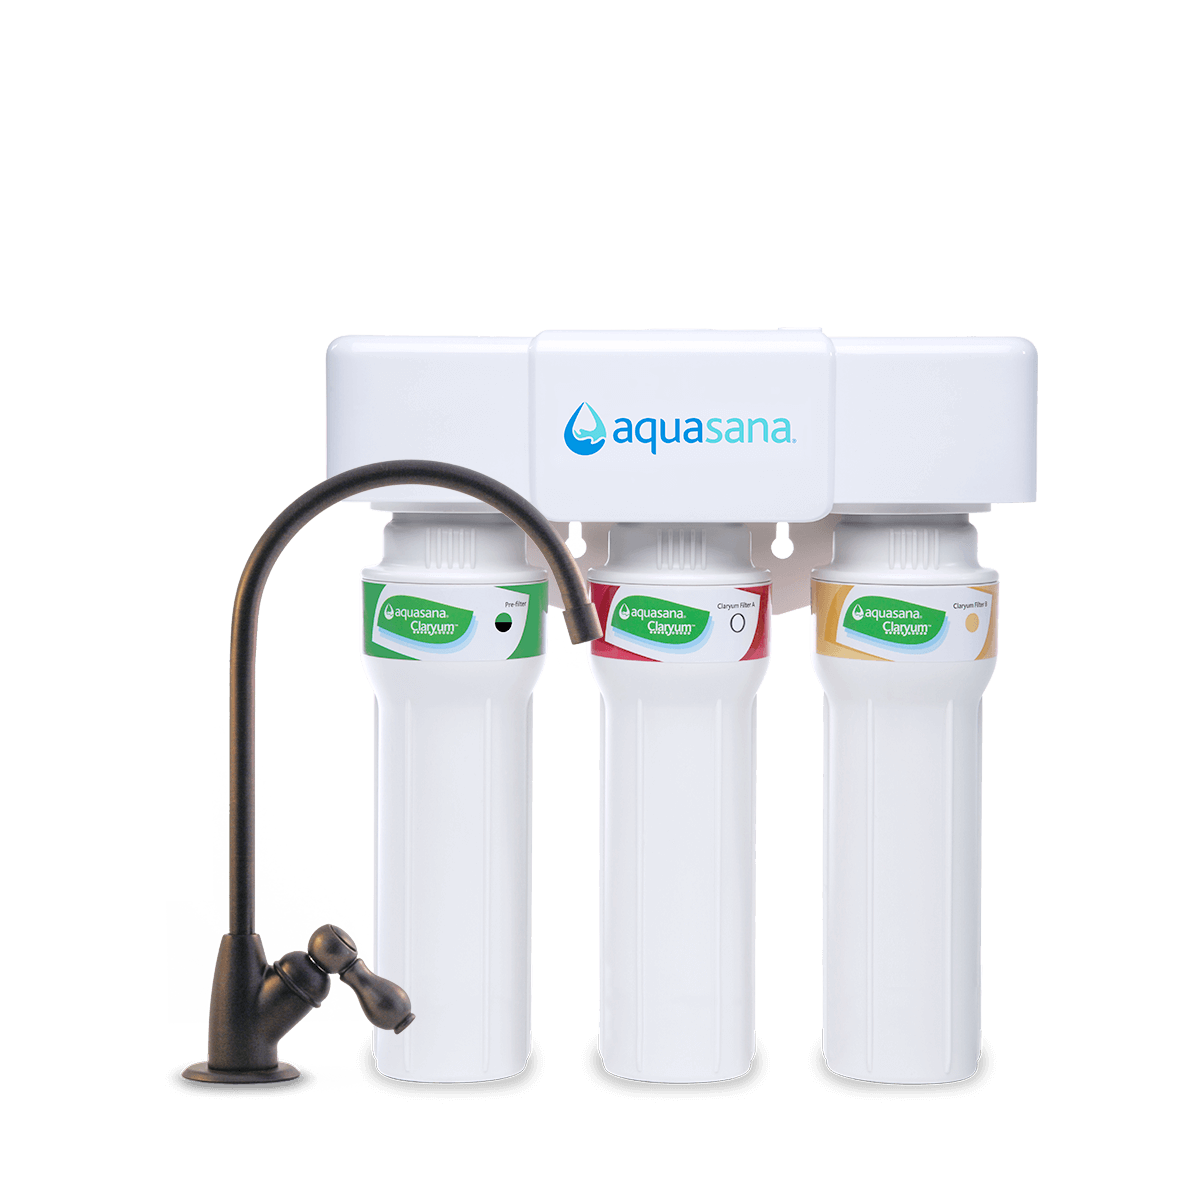 Aquasana 3-Stage Under Sink Water Filter Max Flow, Oil Rubbed Bronze, 1/2 Year/800 Gallon